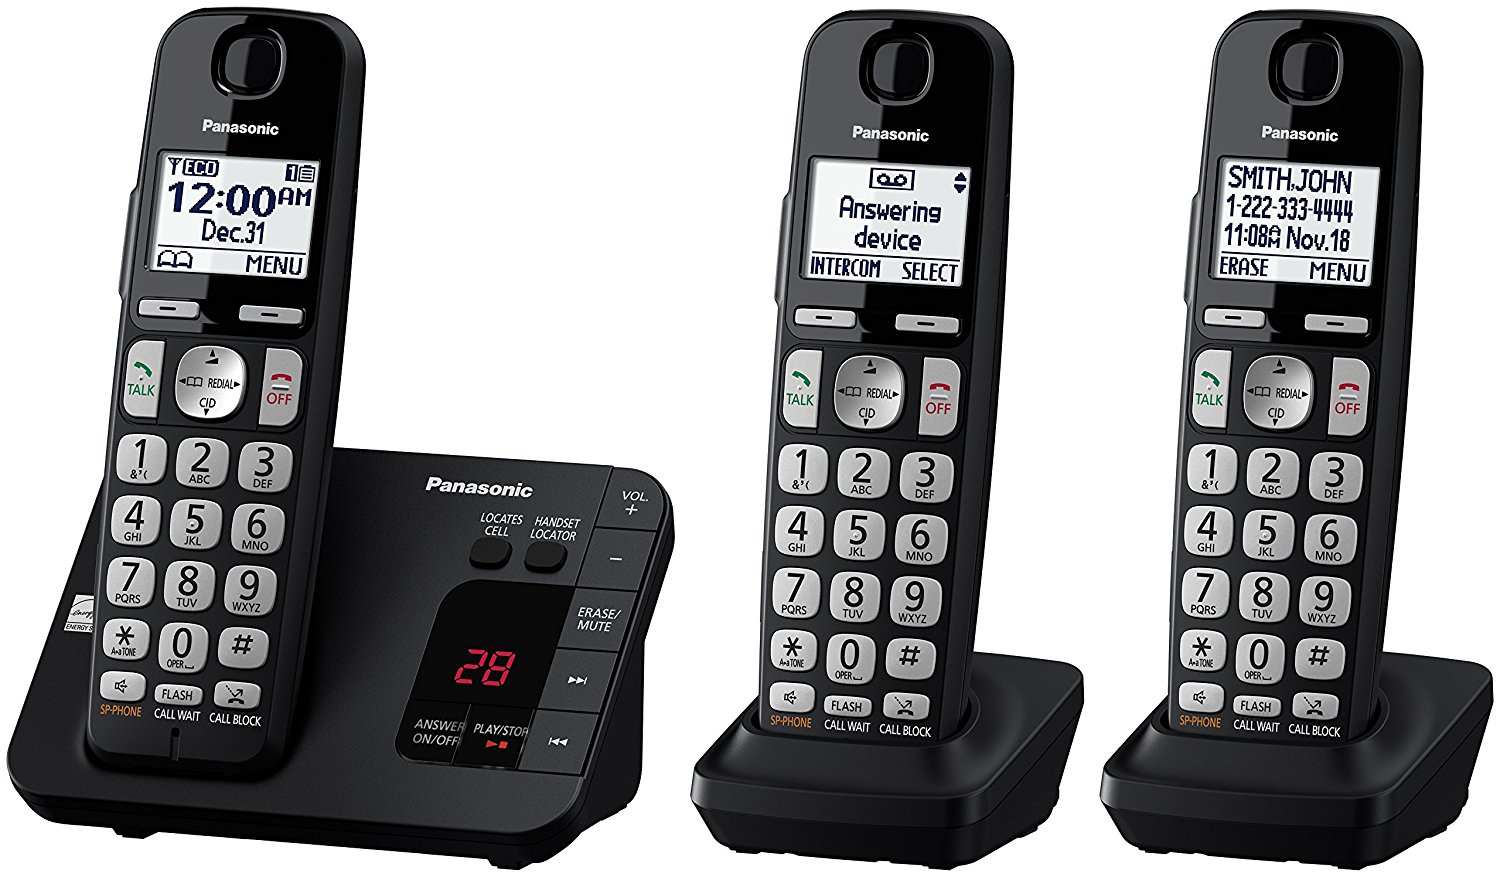 Panasonic Cordless Phone With 3 Handsets and Answering Machine Just $47.25! (Was $89.95)